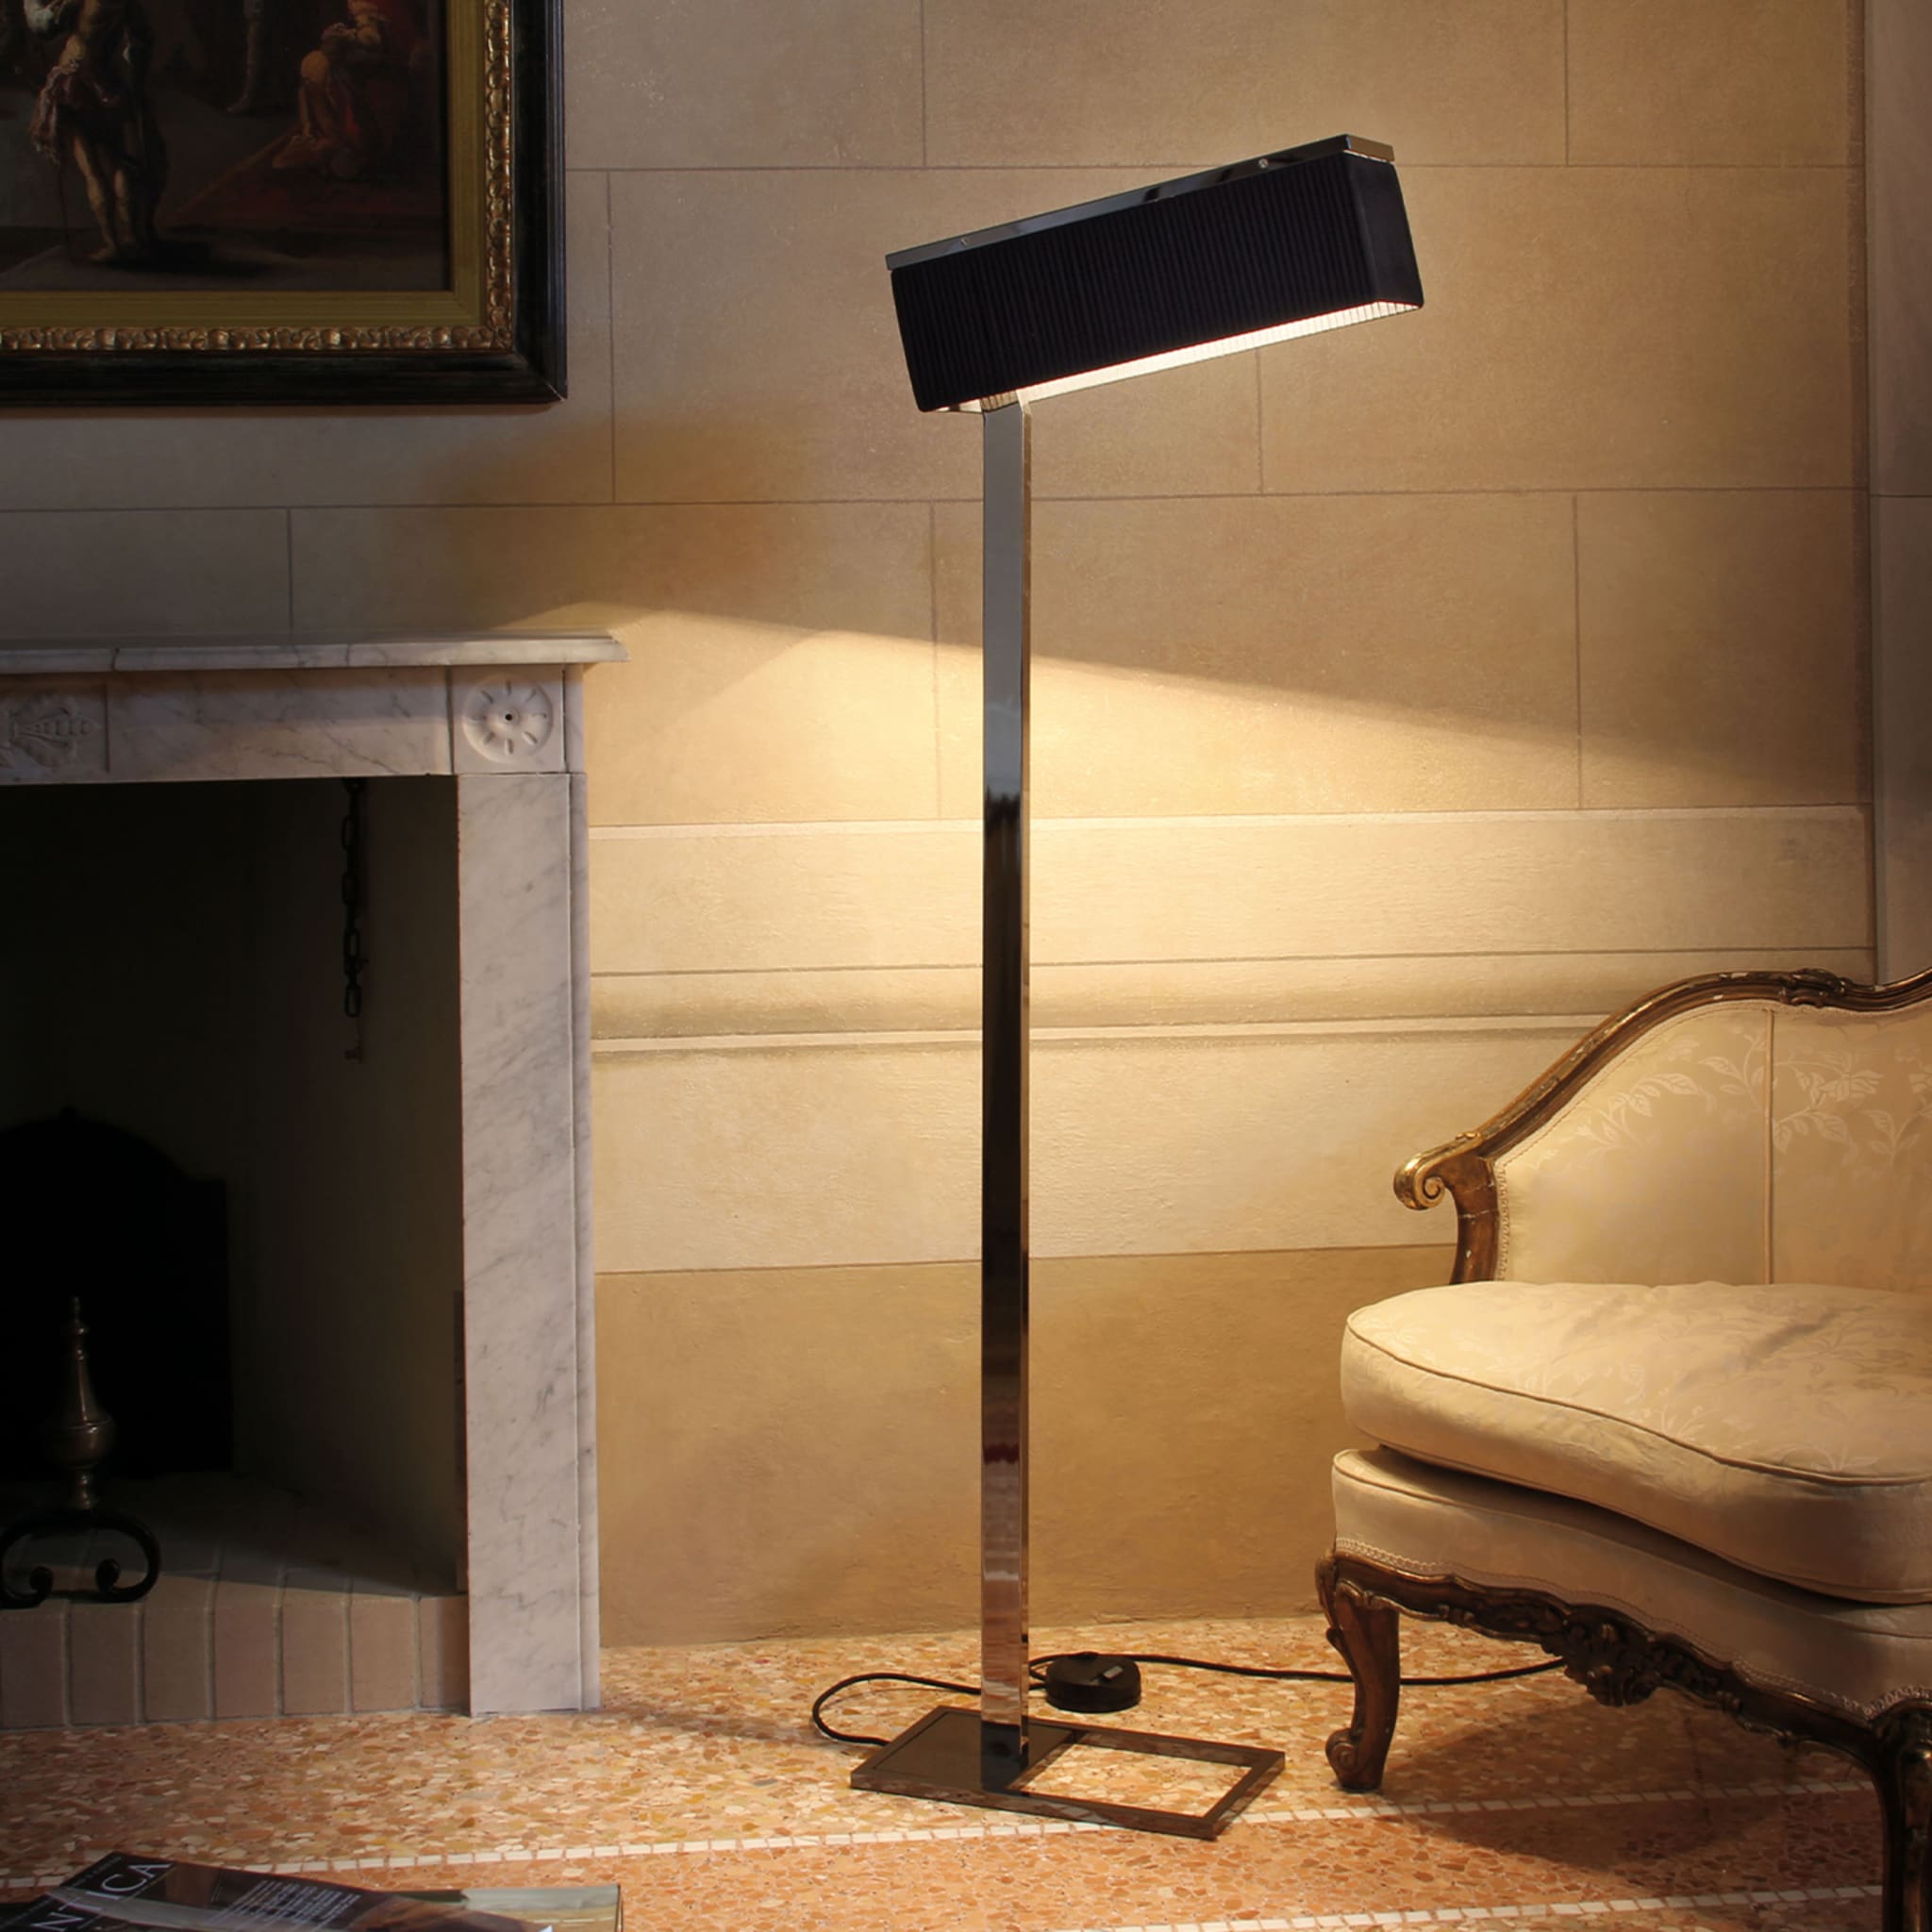 Gimko L Black Floor Lamp by Arch. Luca Sgroi - Alternative view 1